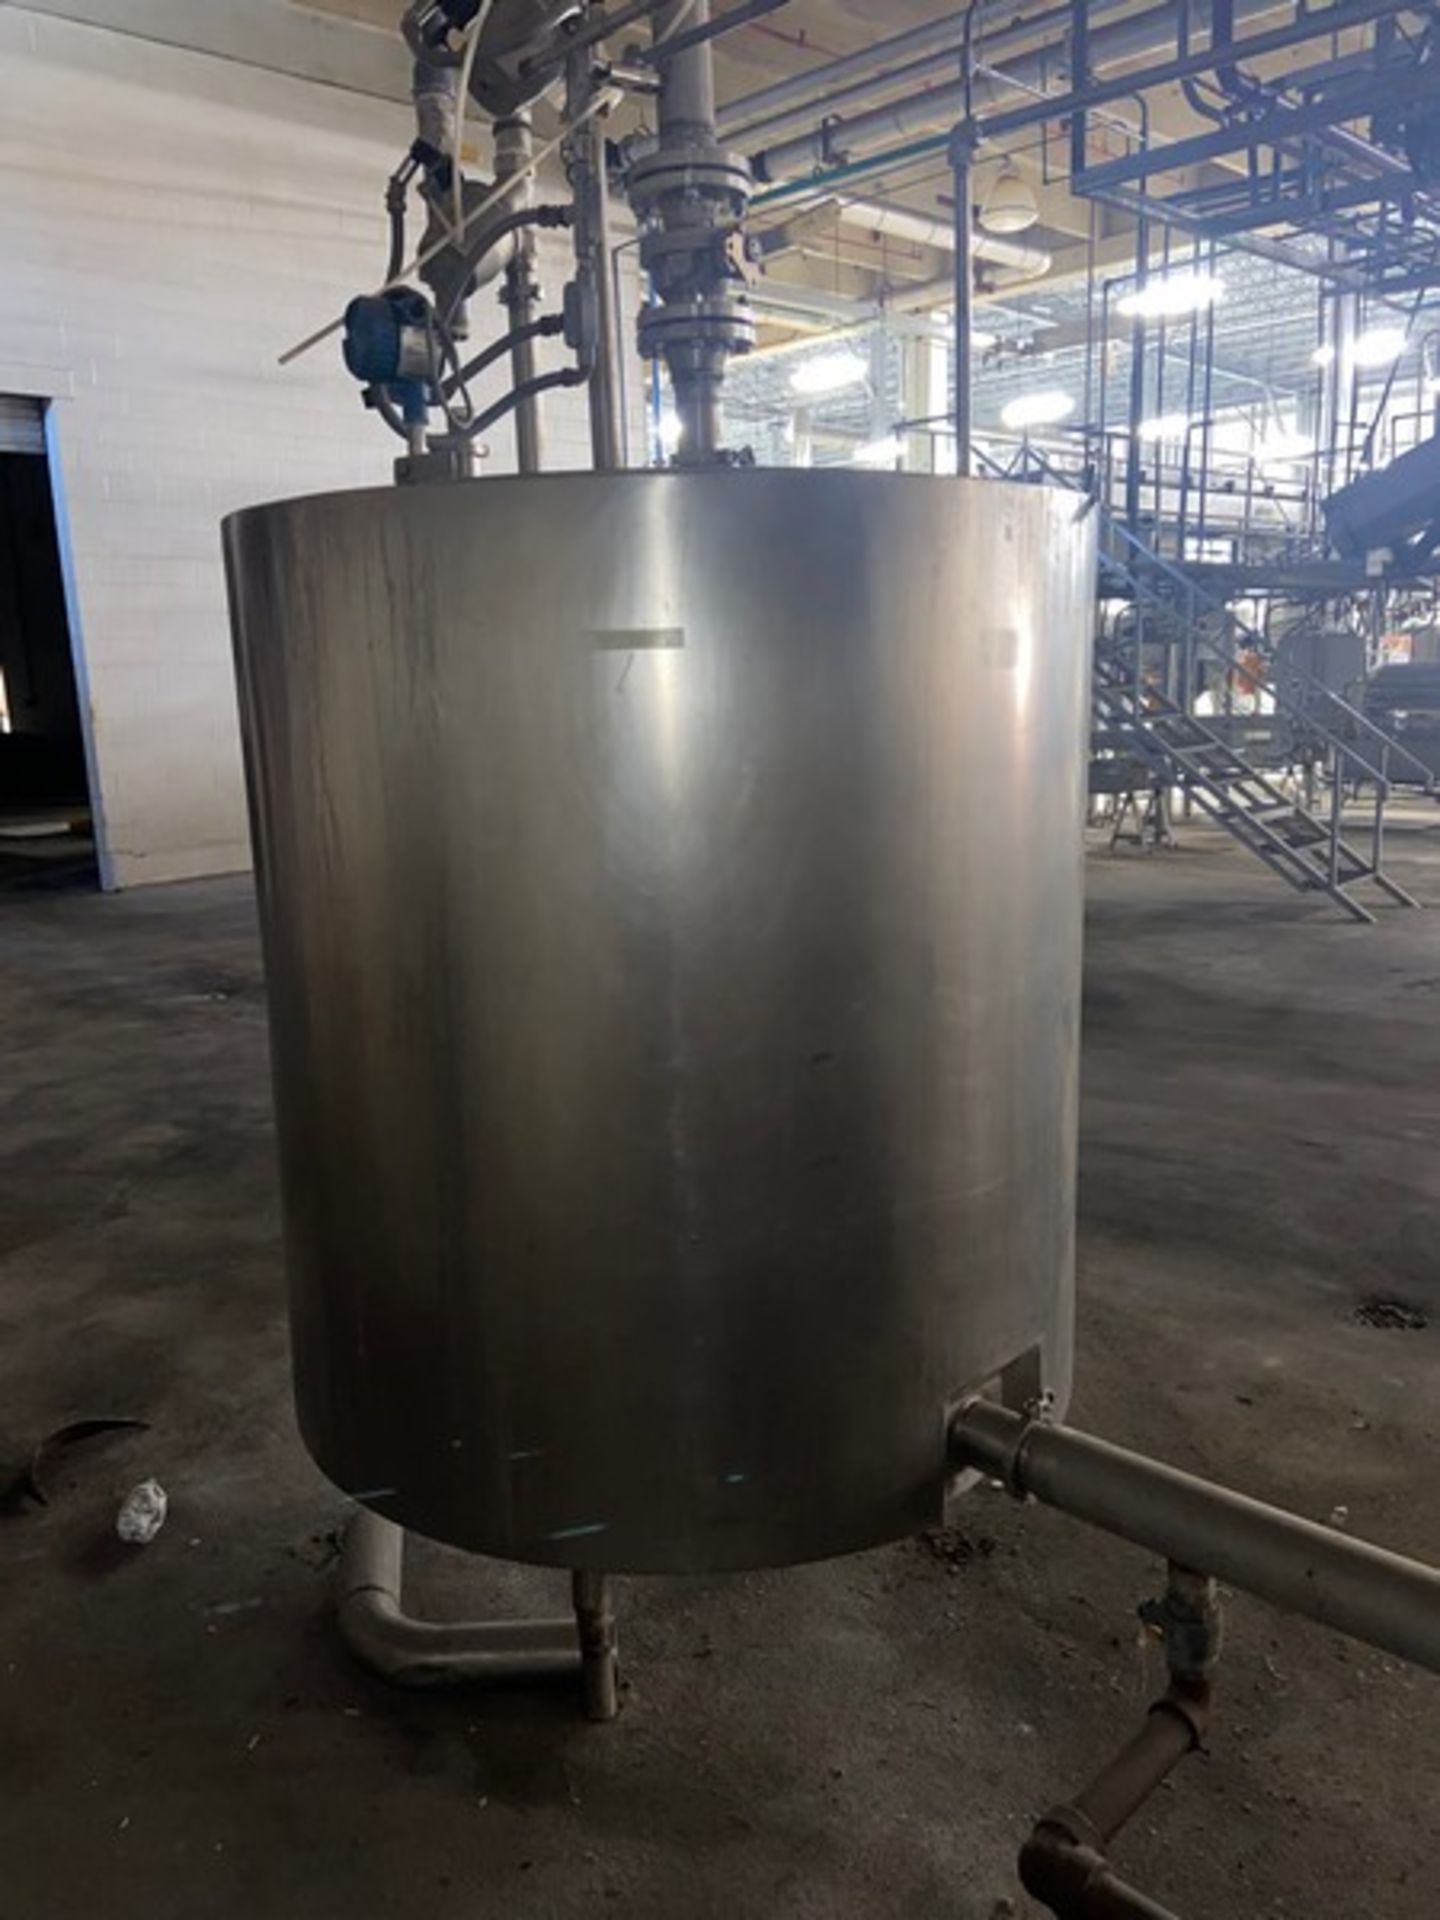 Damrow Bros. 400 Gal. S/S Vertical Insulated Tank, S/N 25609, with S/S Hinge Lid, Mounted on S/S - Image 4 of 16